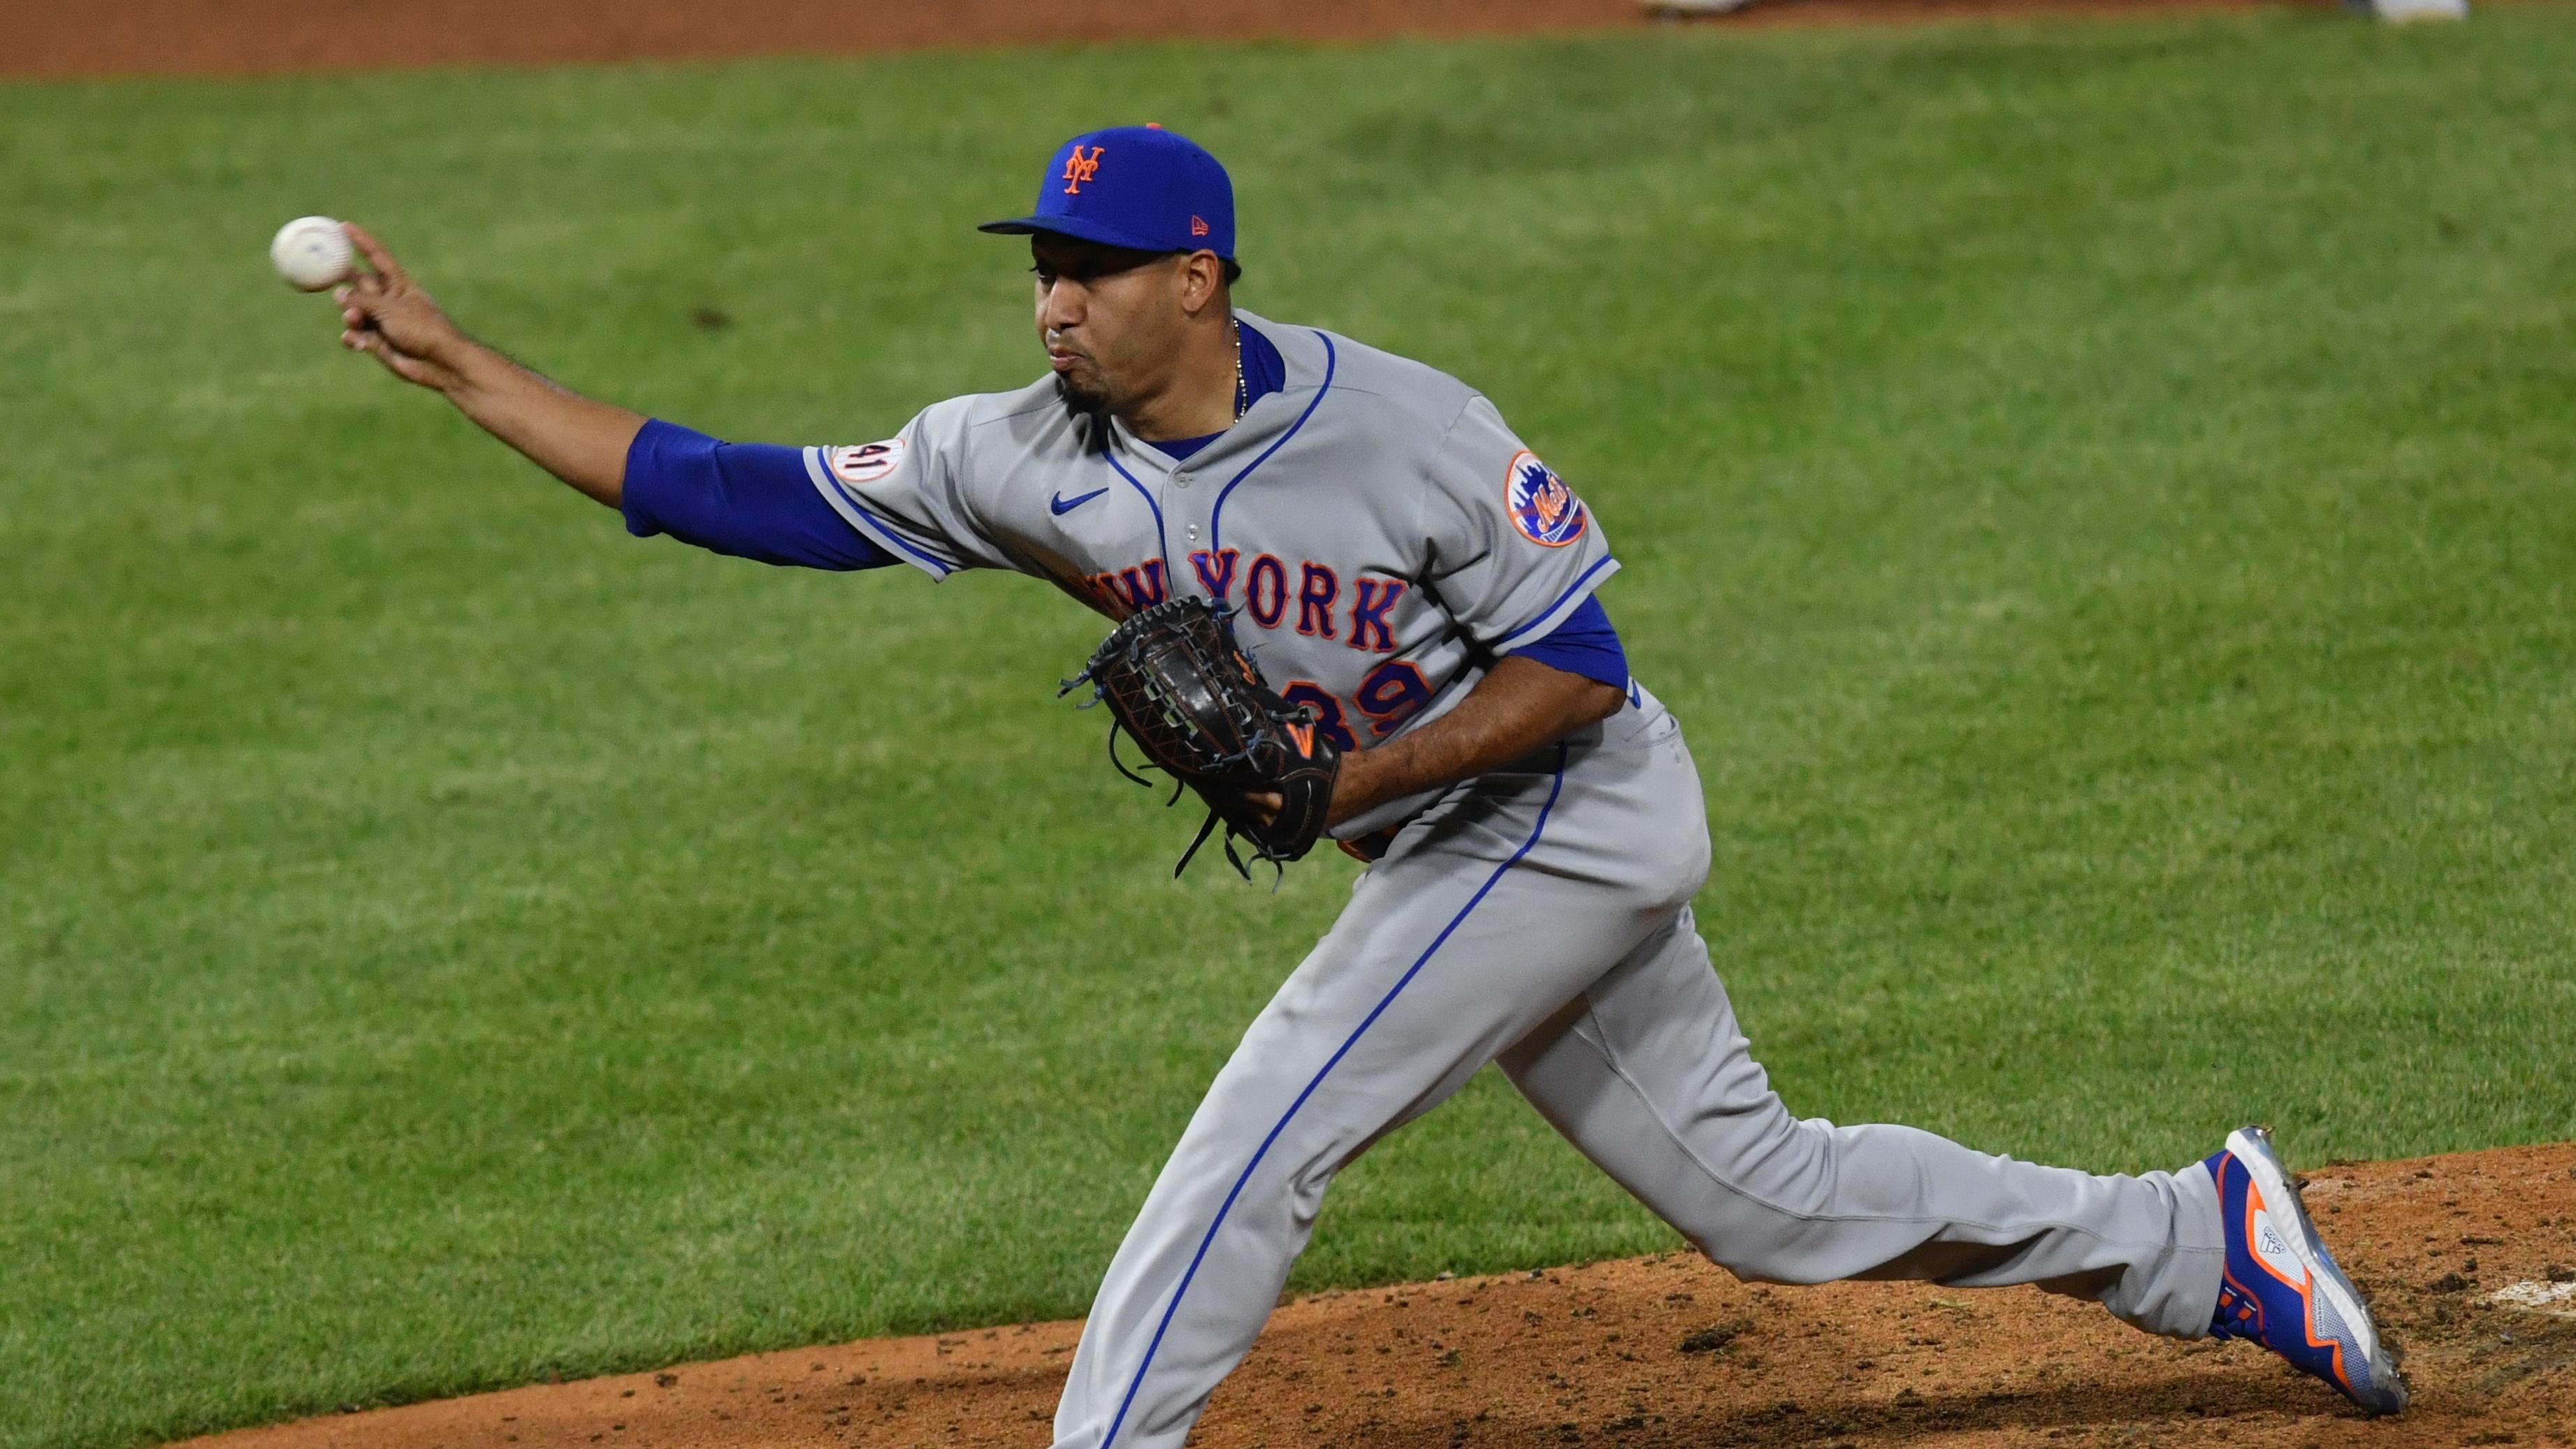 May 2, 2021; Philadelphia, Pennsylvania, USA; New York Mets relief pitcher Edwin Diaz (39) throws a pitch in the ninth inning against the Philadelphia Phillies at Citizens Bank Park. Mandatory Credit: Kyle Ross-USA TODAY Sports / © Kyle Ross-USA TODAY Sports